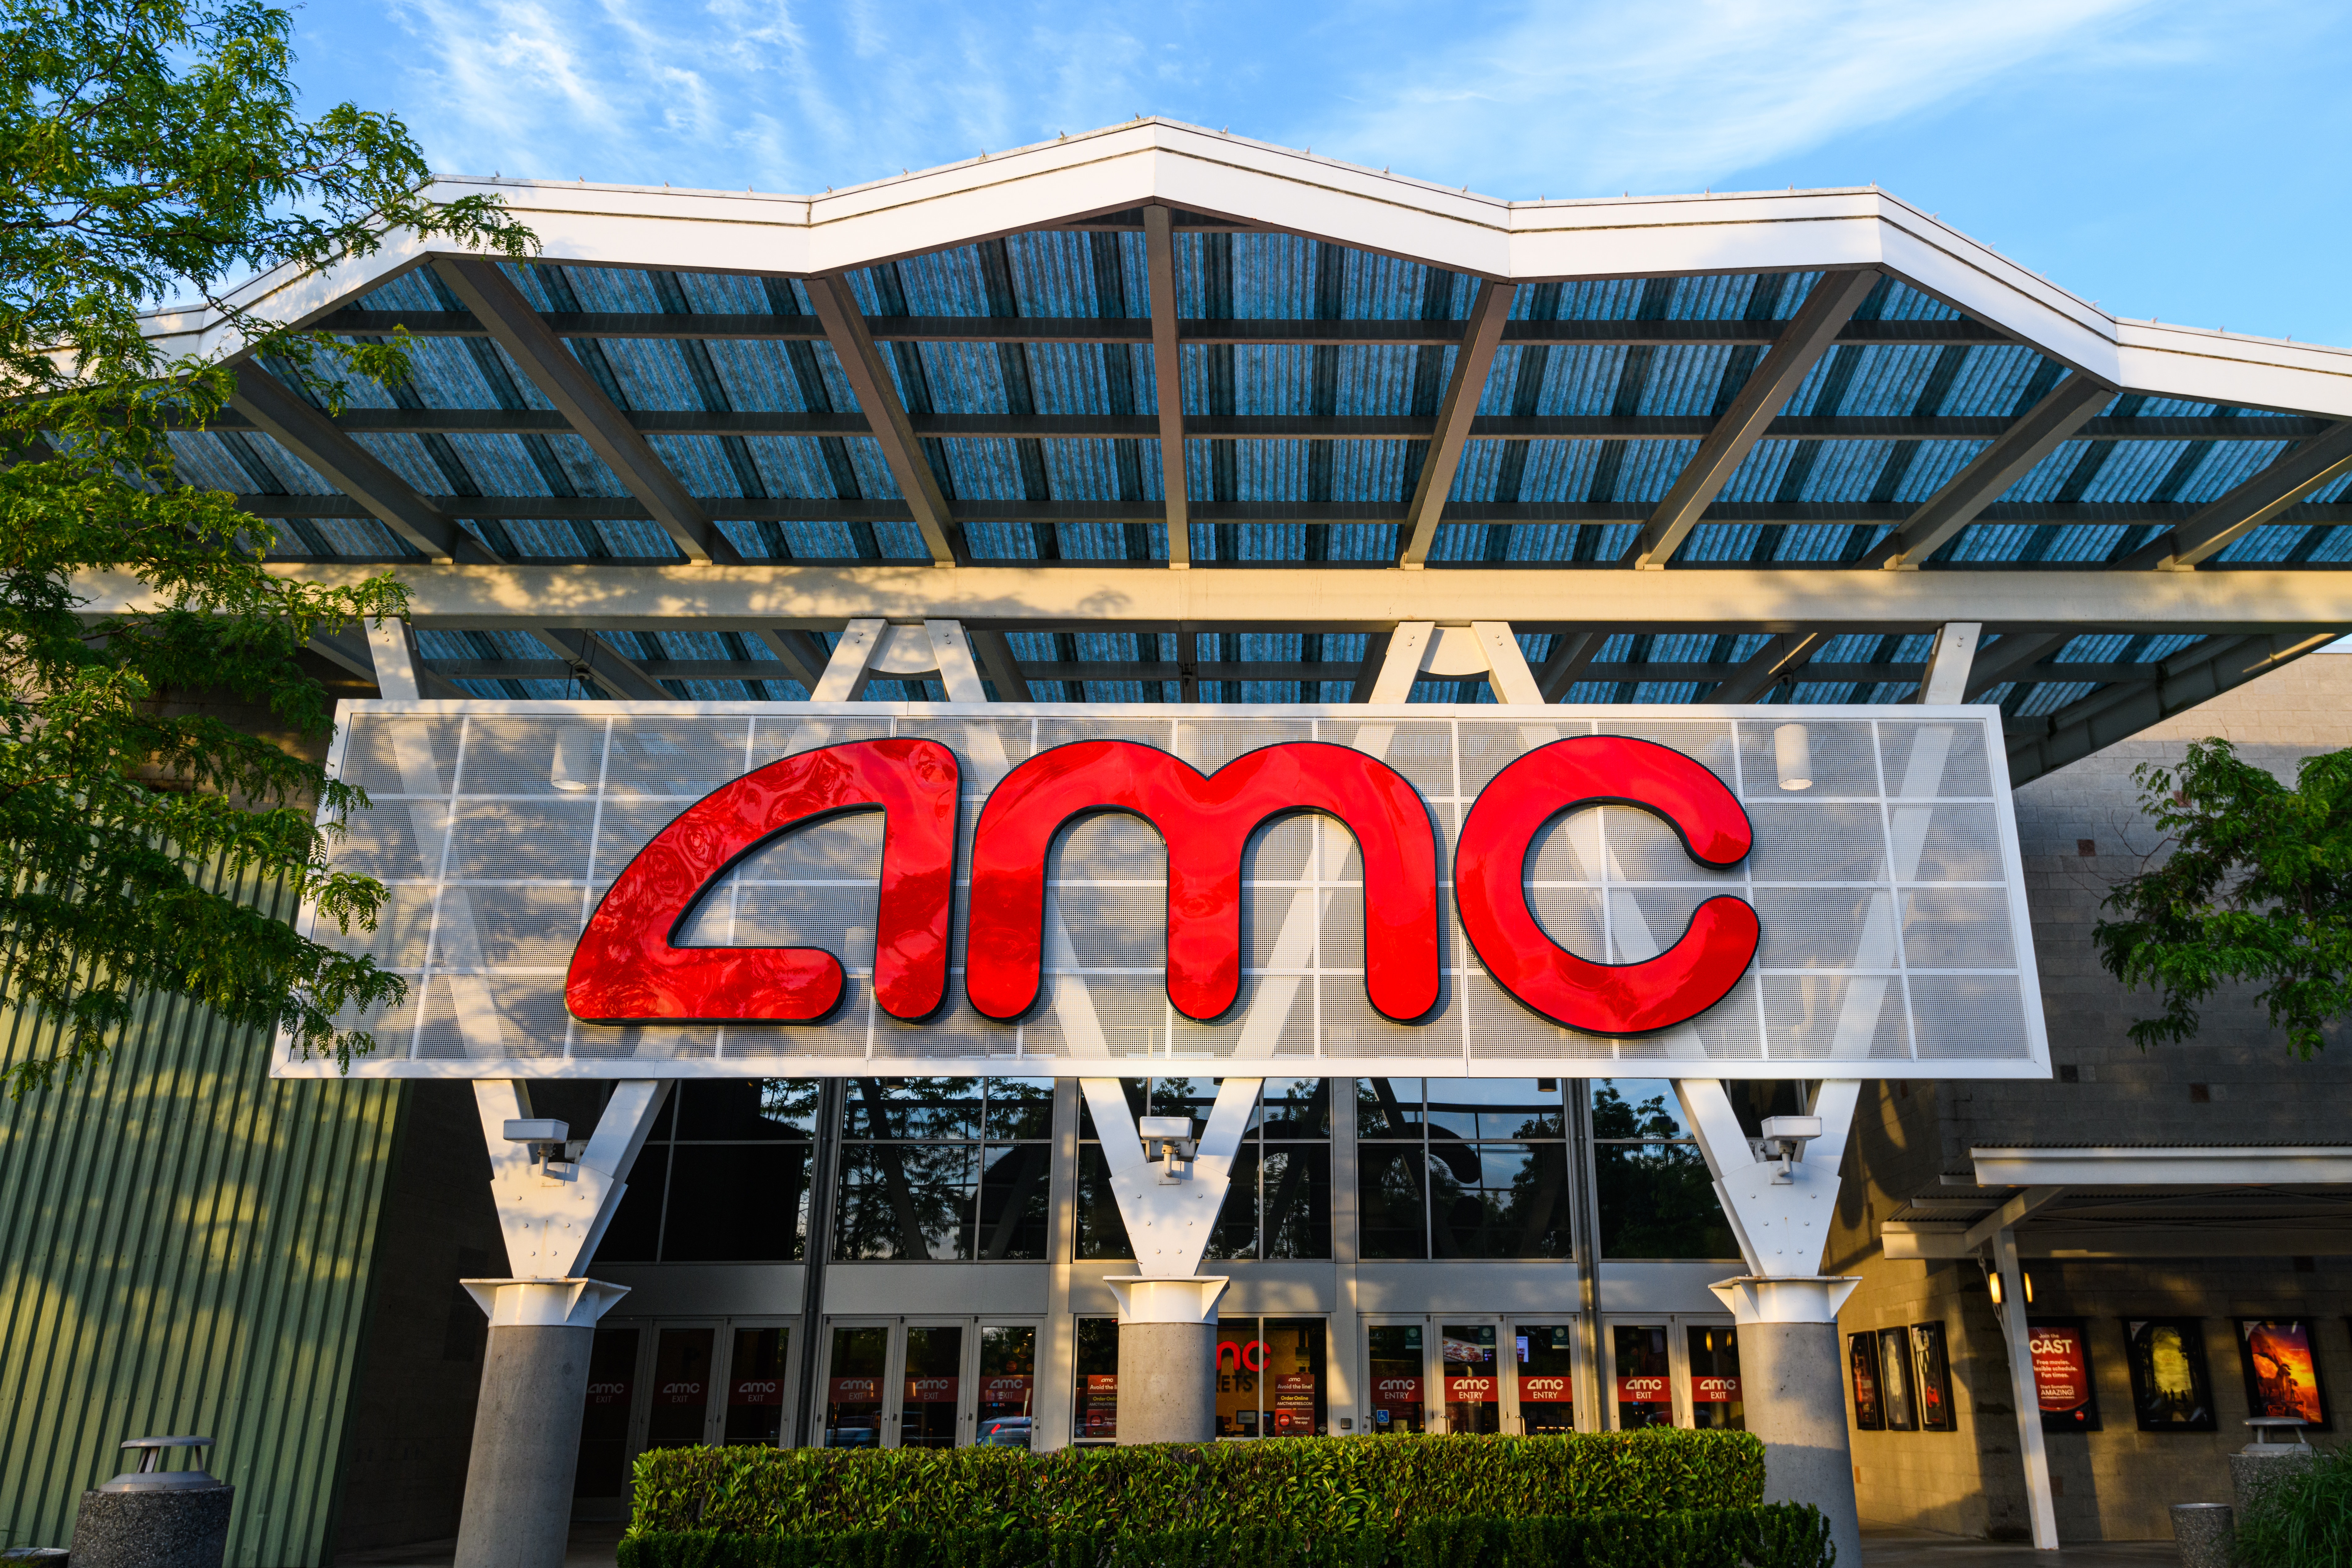 As AMC Enters Bull Cycle, SmileDirectClub, Clover Health Move In Uptrends: What To Watch With The 3 Stocks